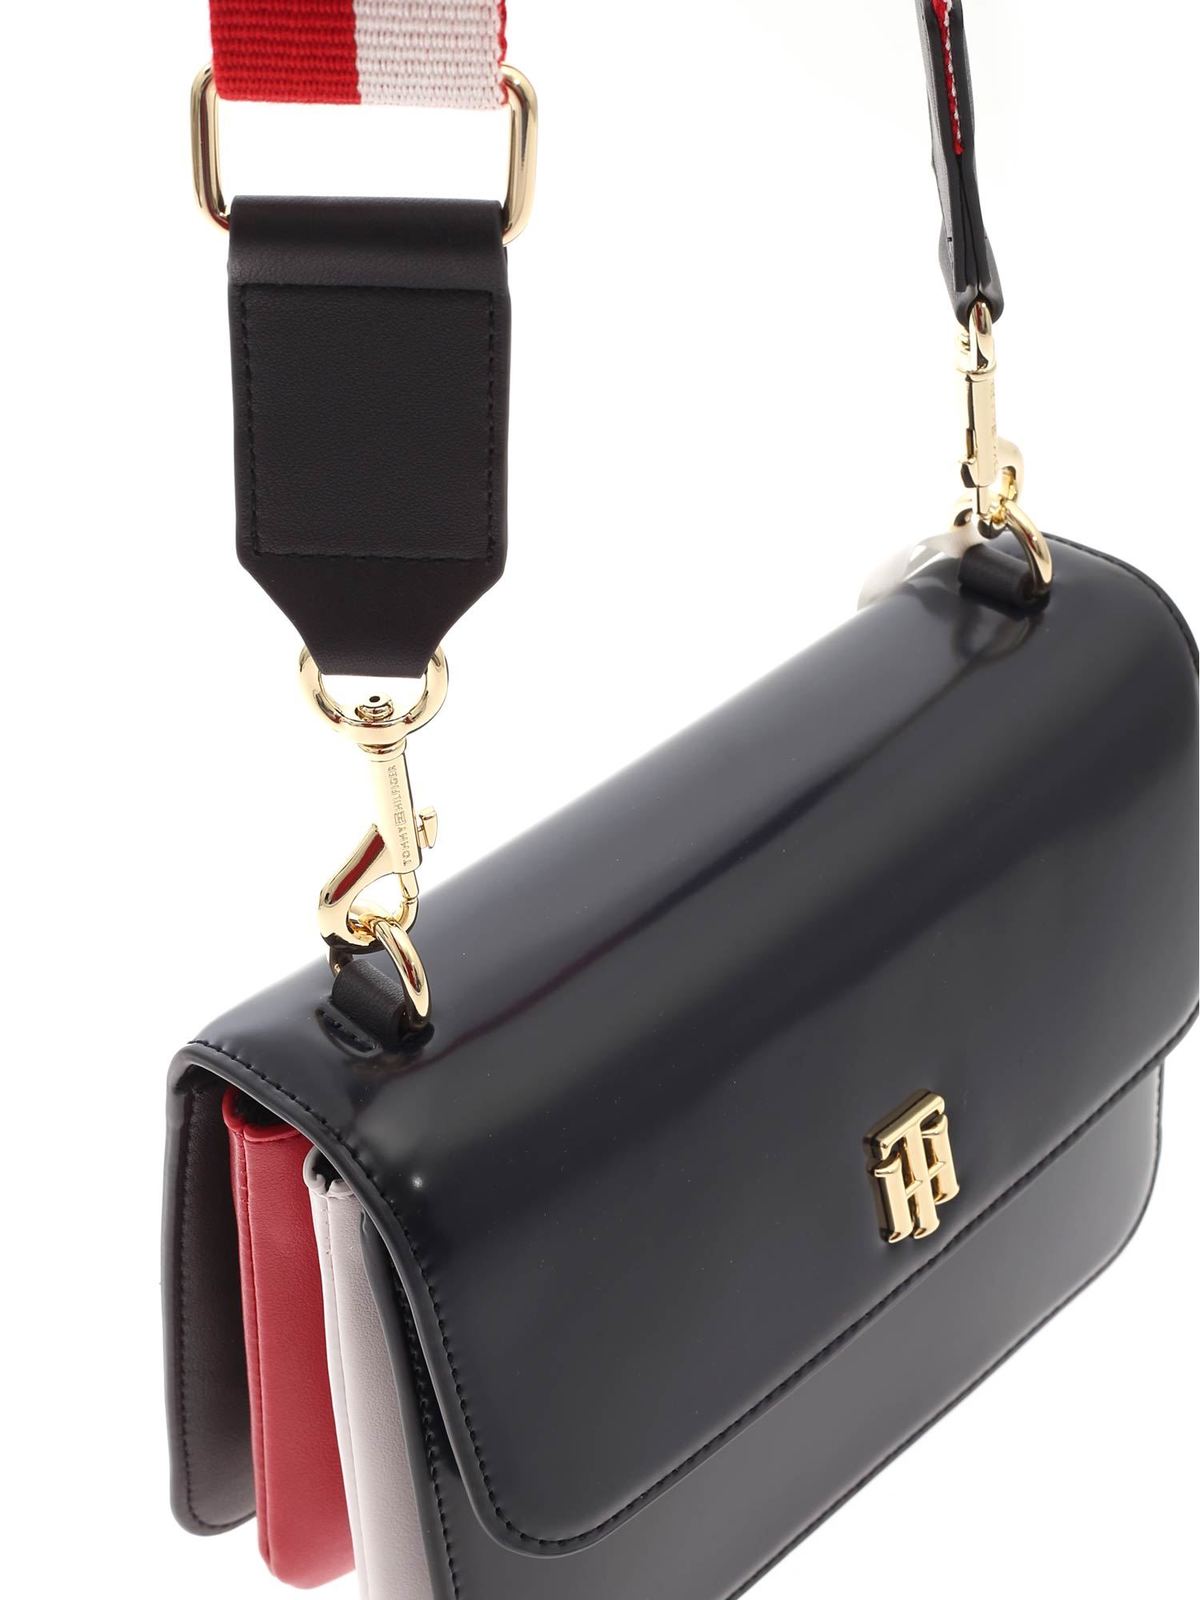 London Tilgivende Tryk ned Cross body bags Tommy Hilfiger - Logo crossbody bag in blue red and white -  AW0AW09695DW5